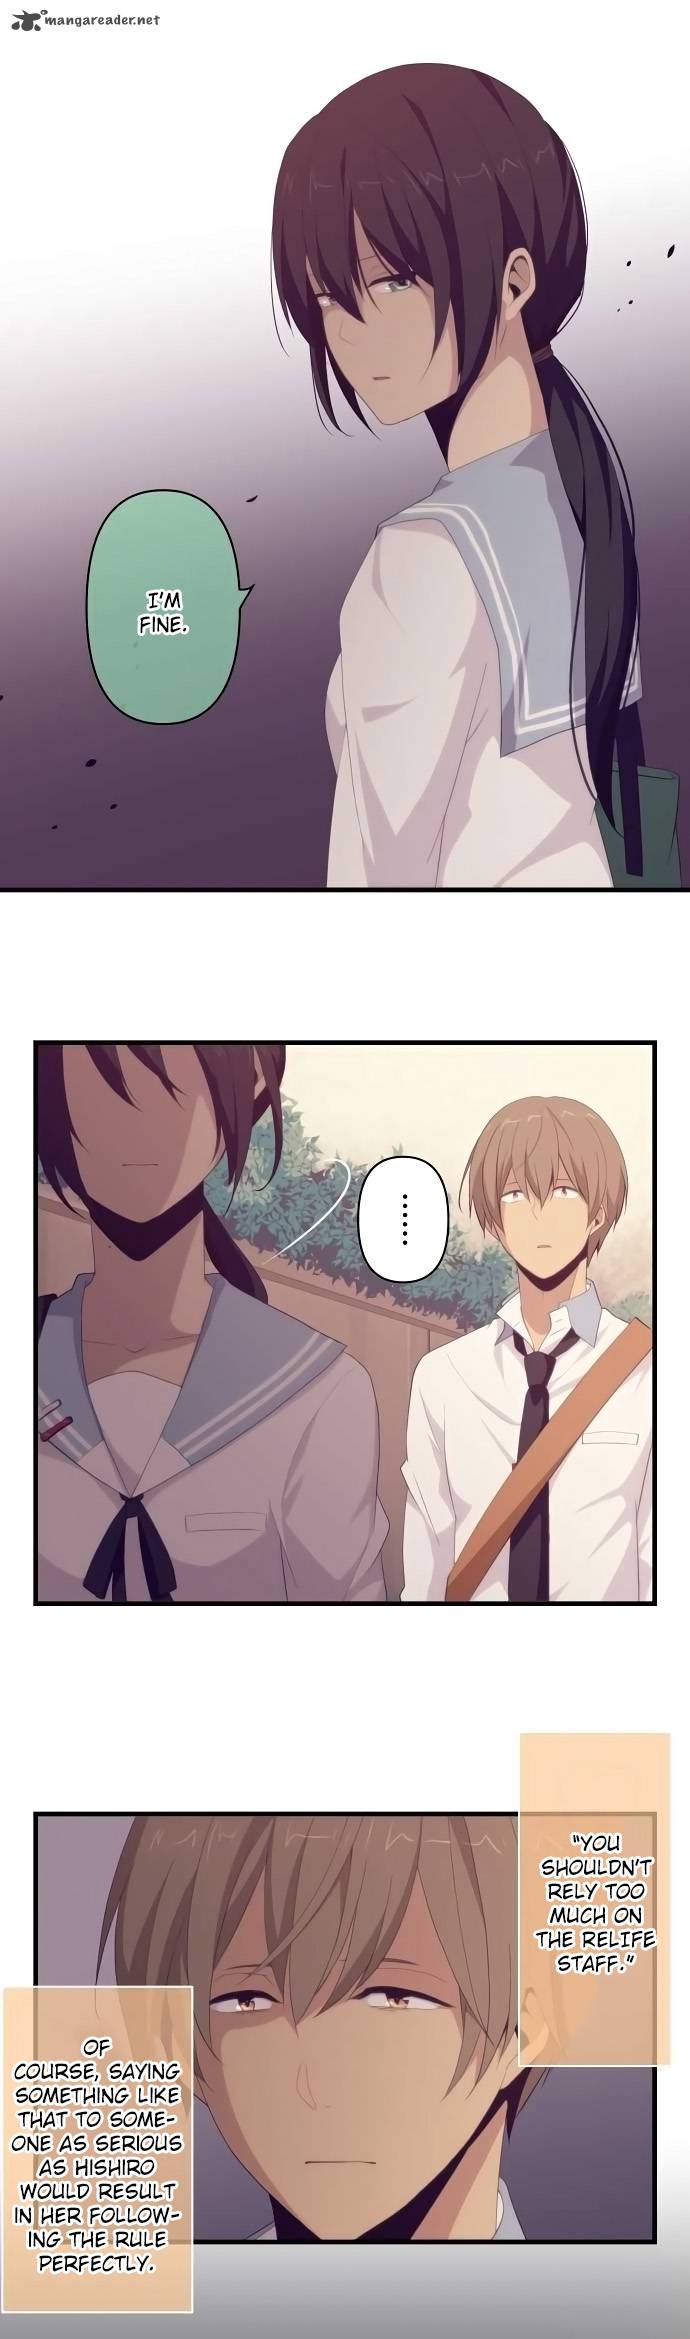 Relife 114 6